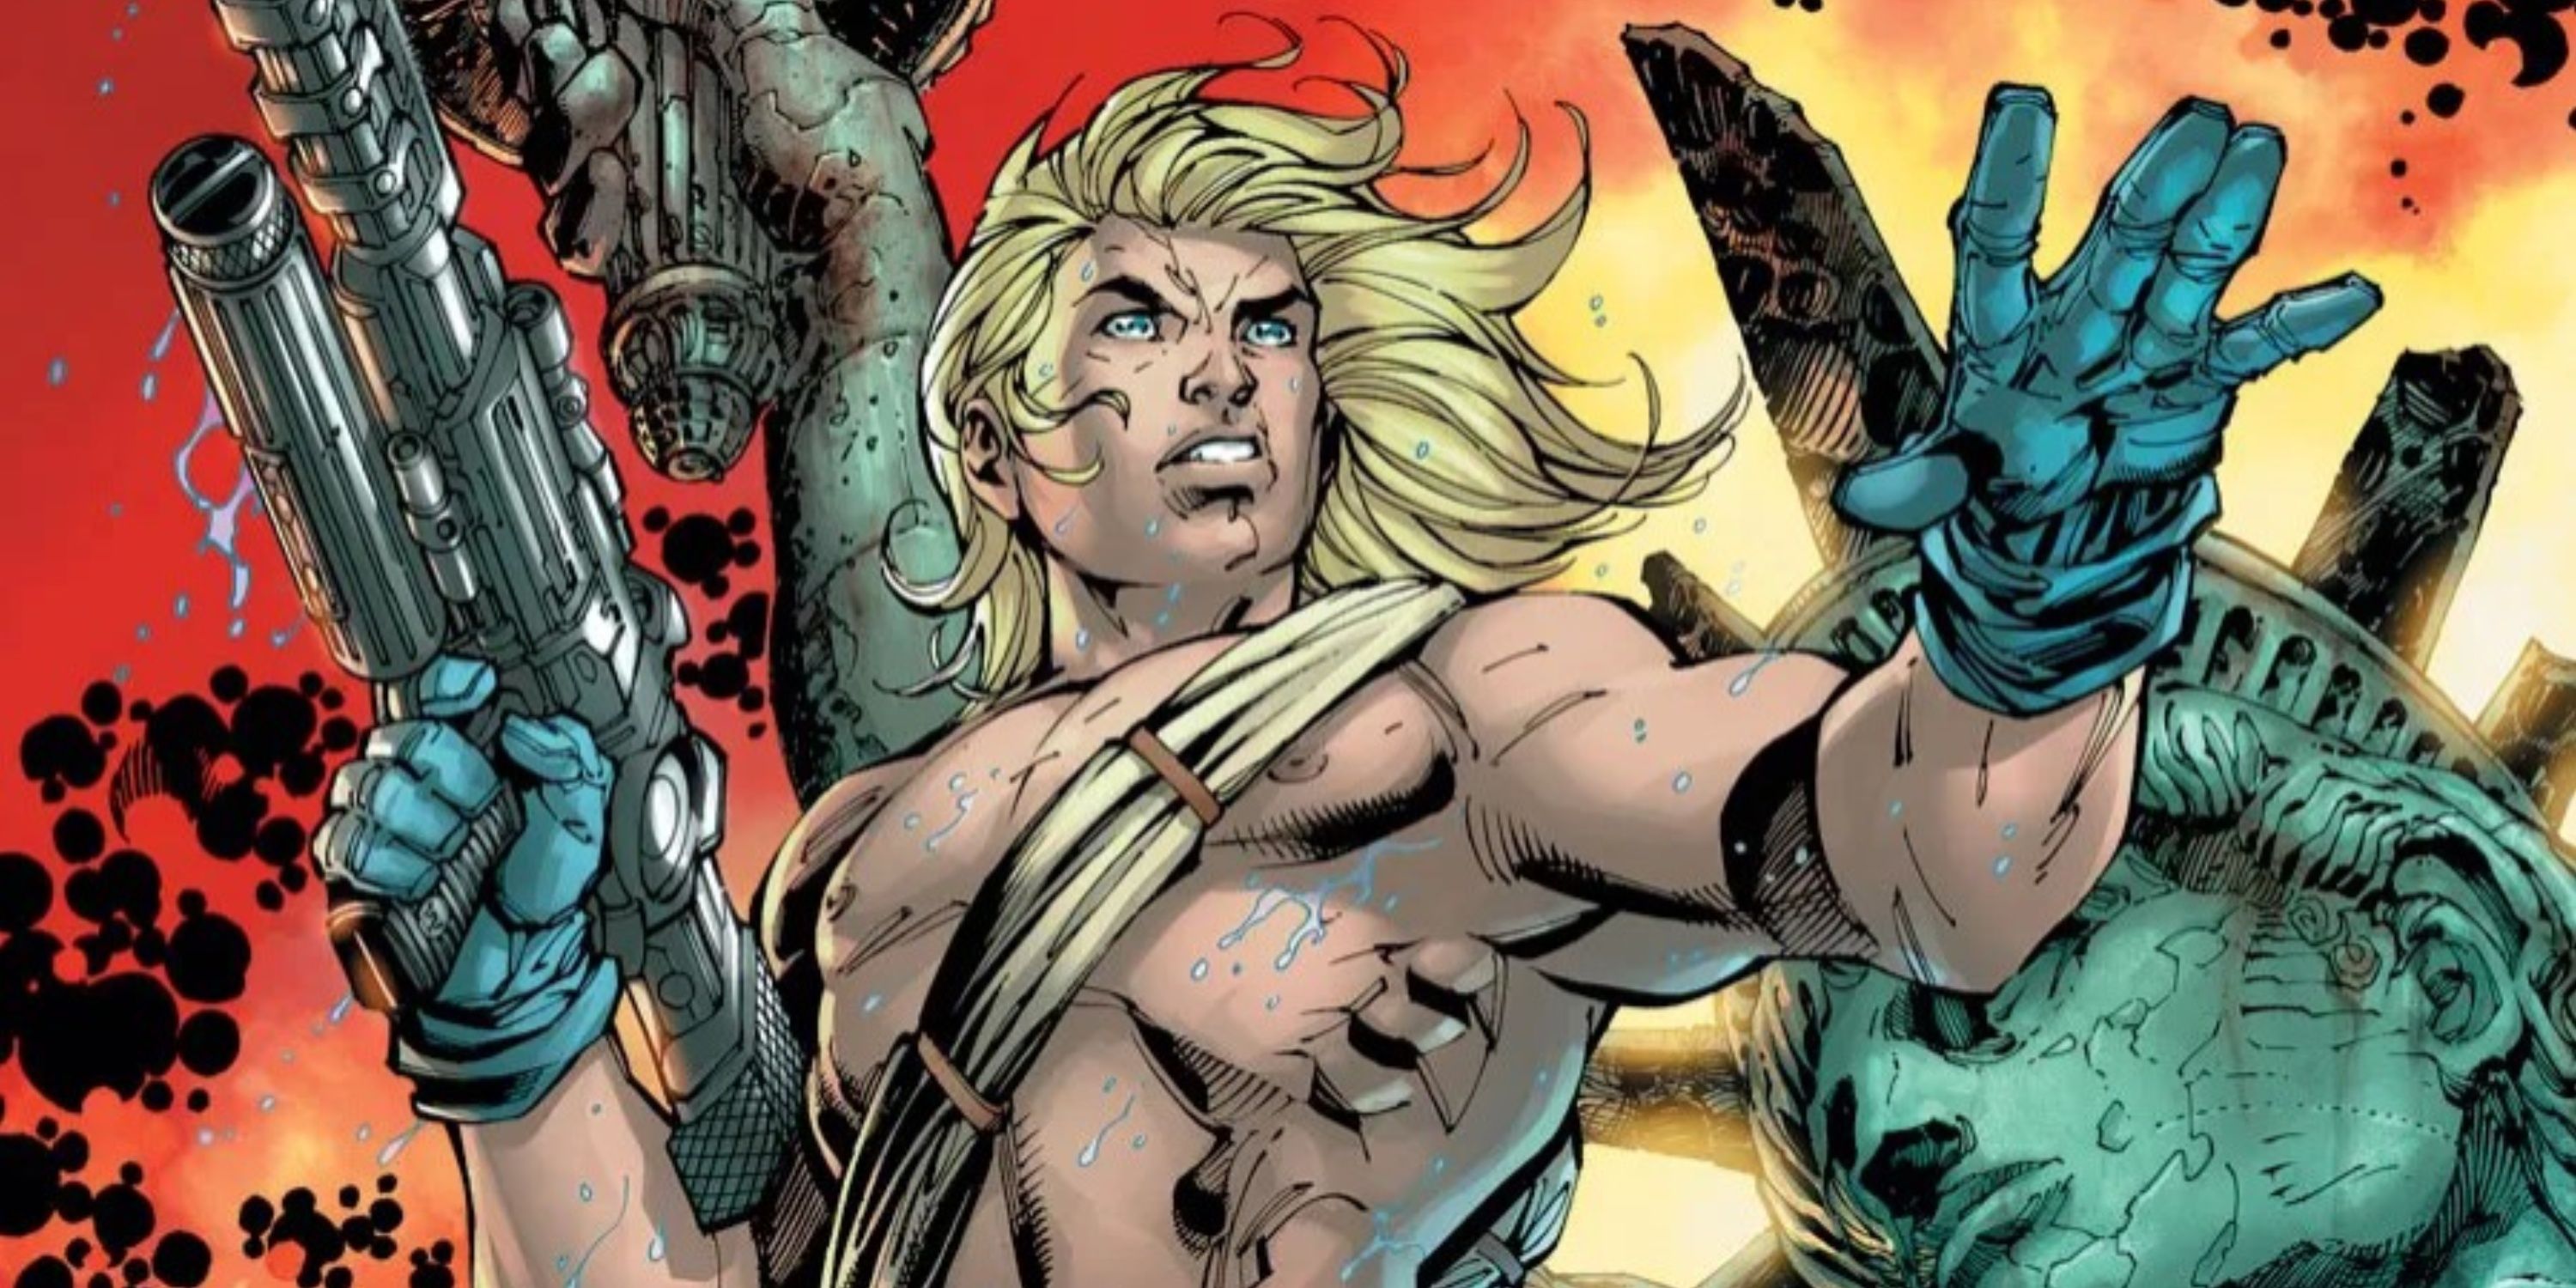 Kamandi holds a gun as he stands in front of the statue of liberty in DC Comics